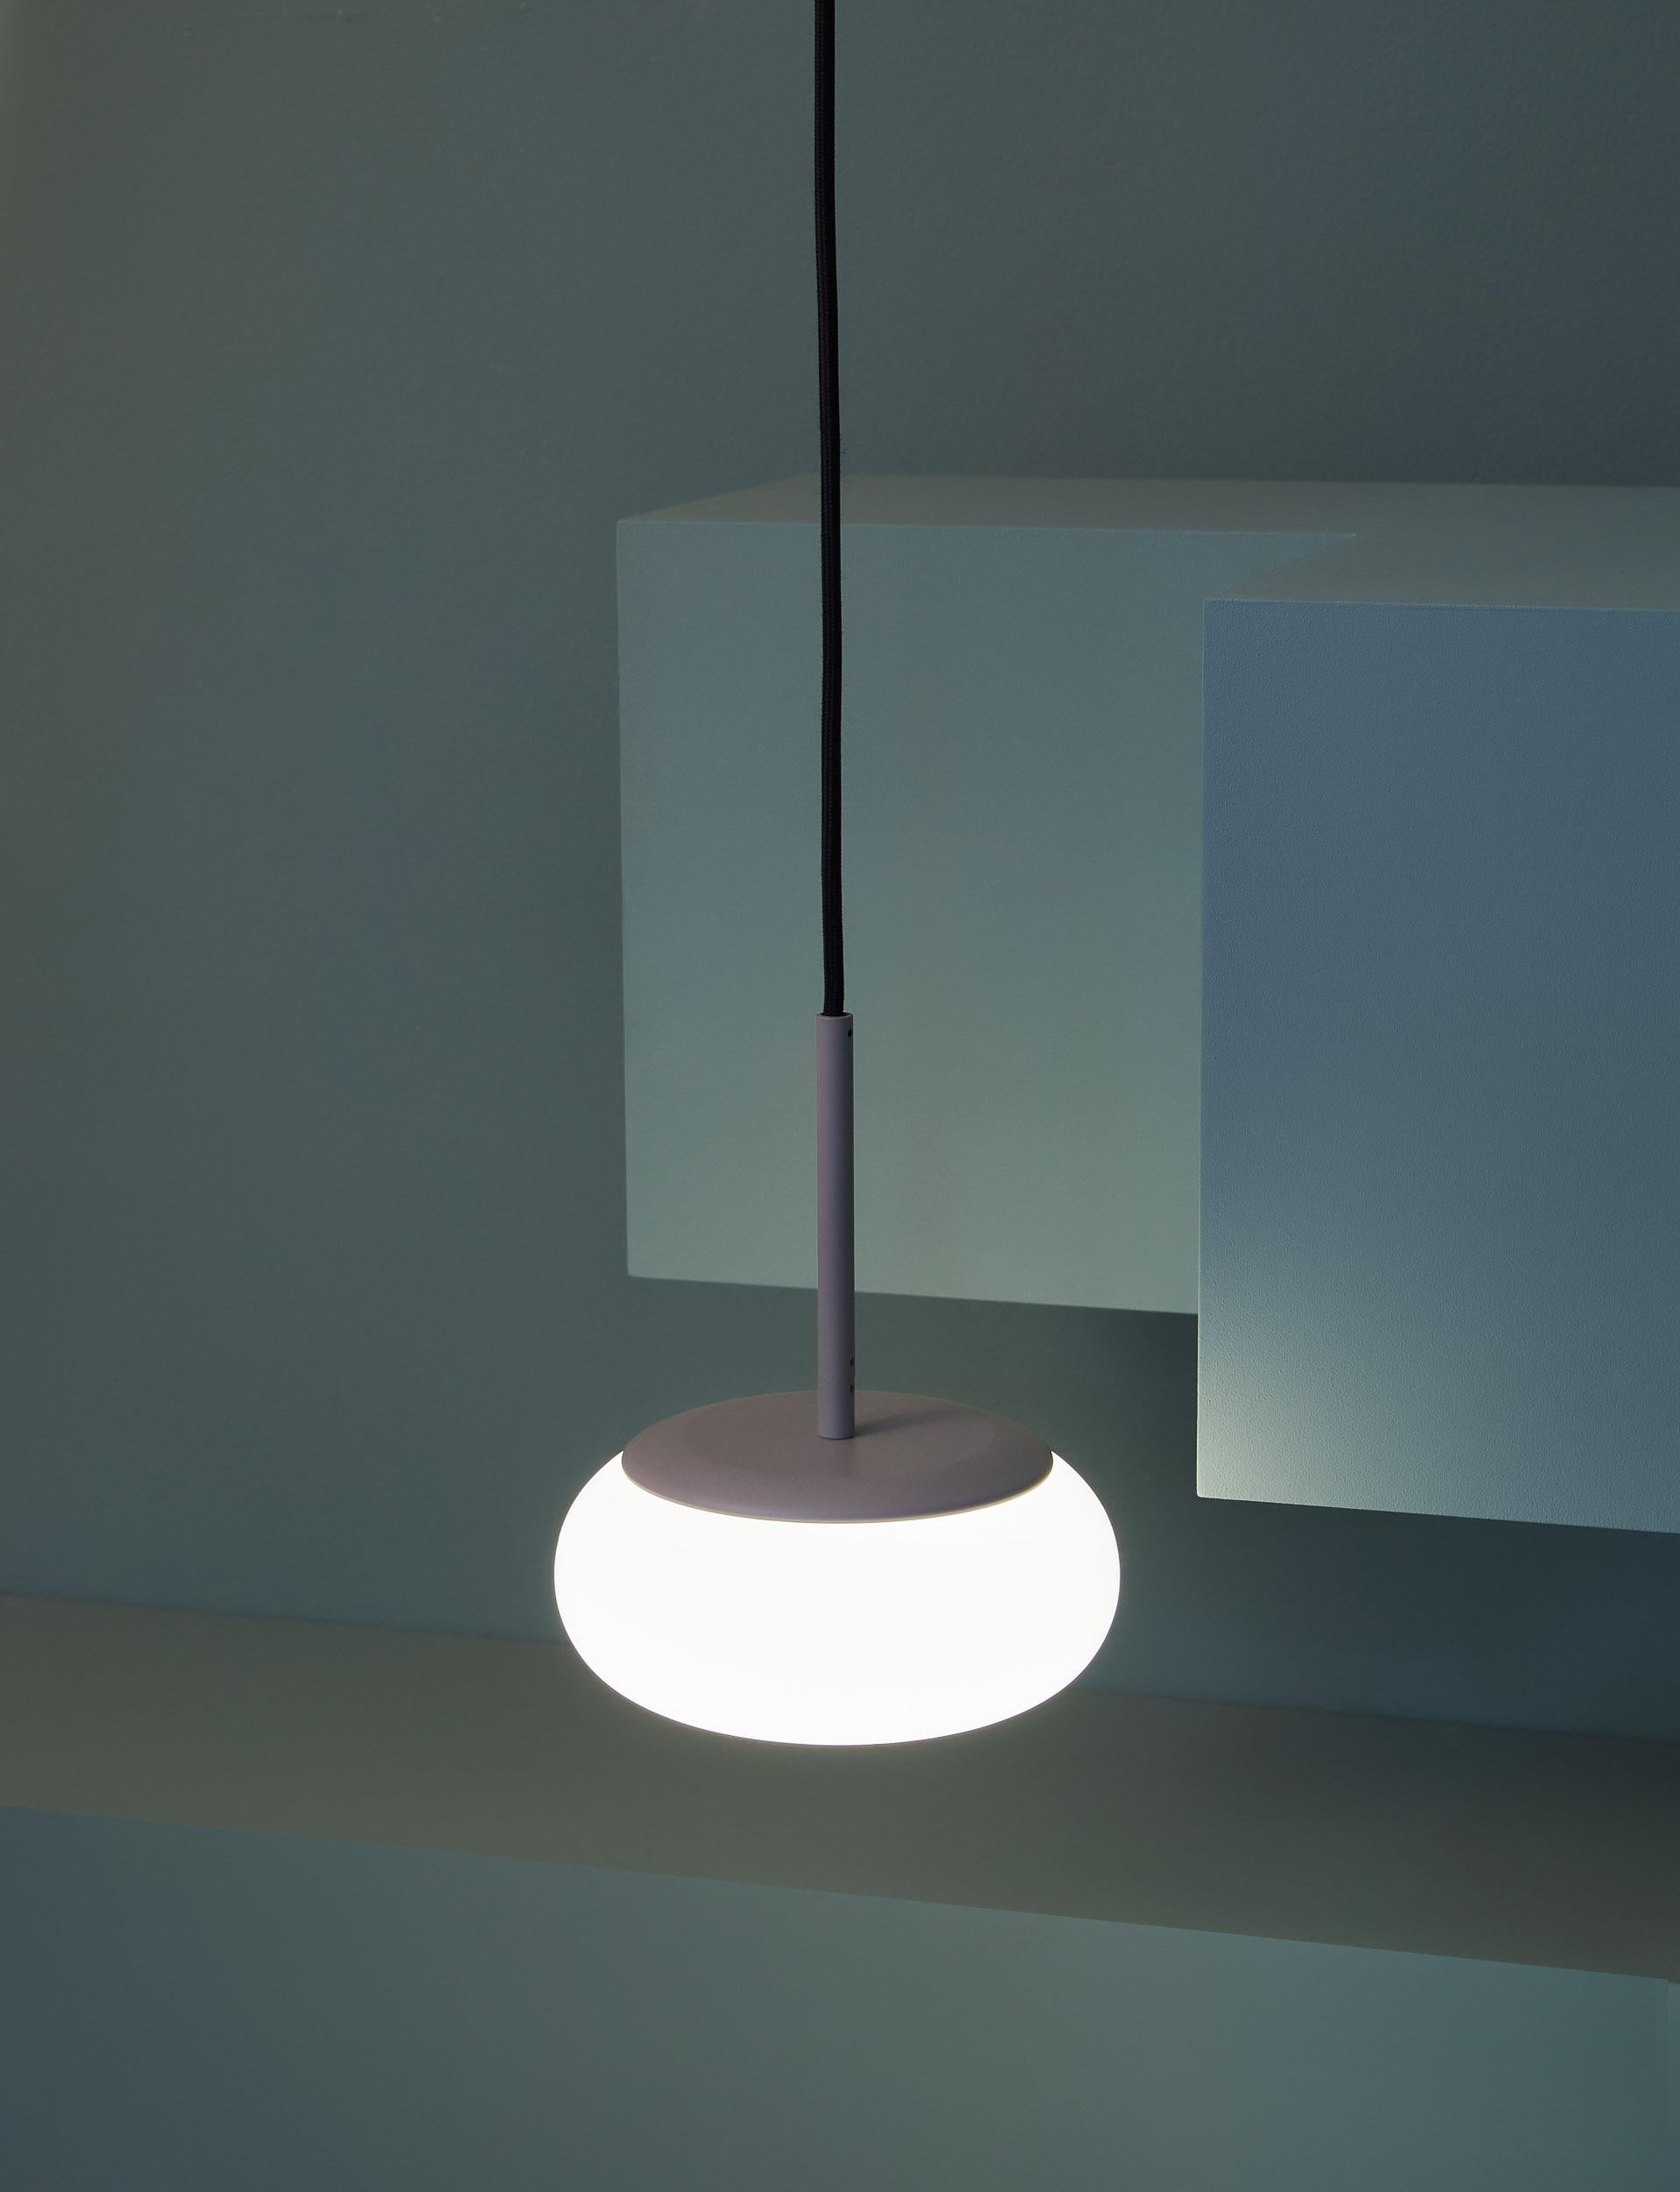 Mozzi Pendant Lamp by AGO Lighting
Small Grey

Opal glass, Steel, Aluminum Integrated LED (SMD), DC
Light source: Integrated LED (SMD), DC
Watt: 6 W
Color Temp. 2700 / 3000 K
Cable Lengths 3M
Ceiling cup Ø 90, H 40 mm

Two sizes available: large (44